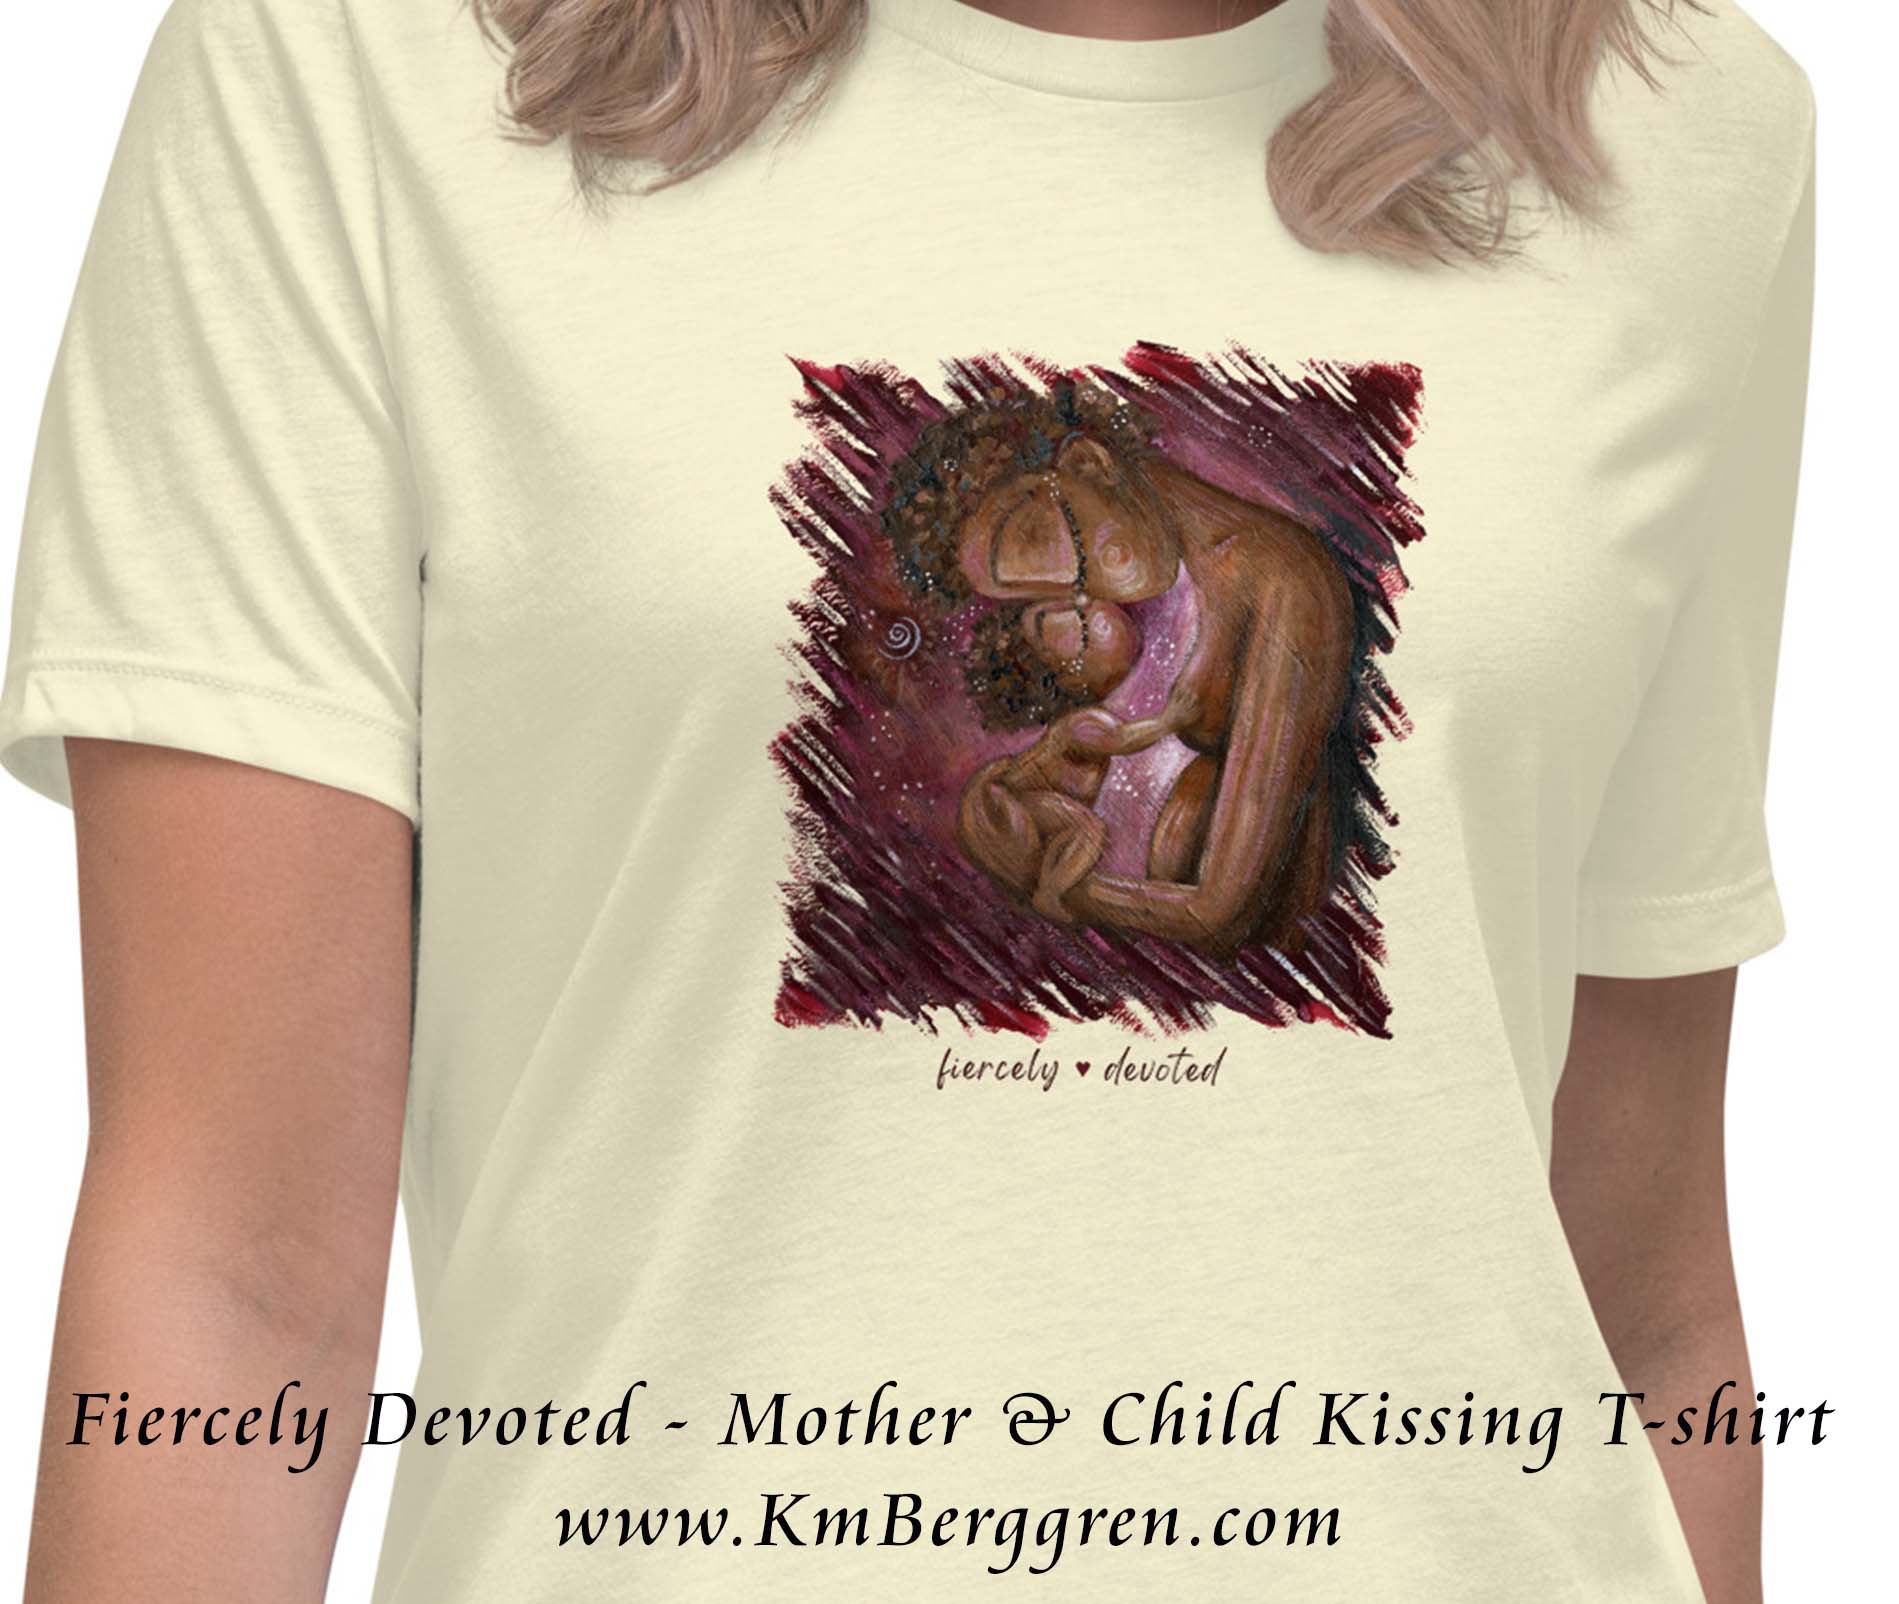 mother and child t-shirt, mom baby shirt, graphic tee motherhood, mother and kids graphic tee, mother child teeshirt, mama baby tee, baby mama t-shirt, tshirt motherhood, gift shirt for mom, wearable art for mom, new baby gift, new mom shirt, new mom gift, kmberggren art on shirts, black mother and child artwork, mother of color, babies of color, black mother and child kissing painting, art clothing,